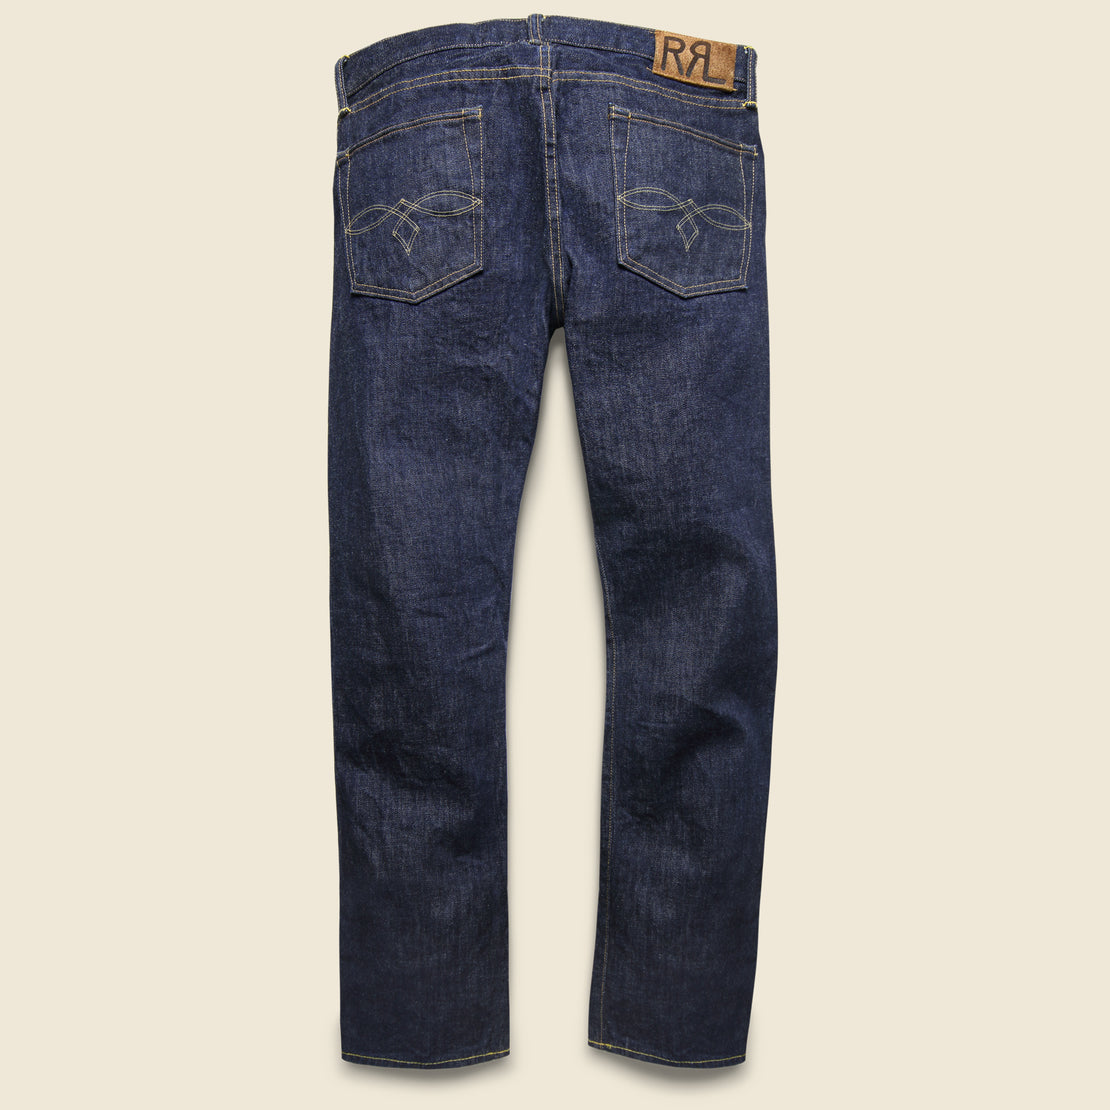 Low Straight Jean - Once Washed - RRL - STAG Provisions - Pants - Denim